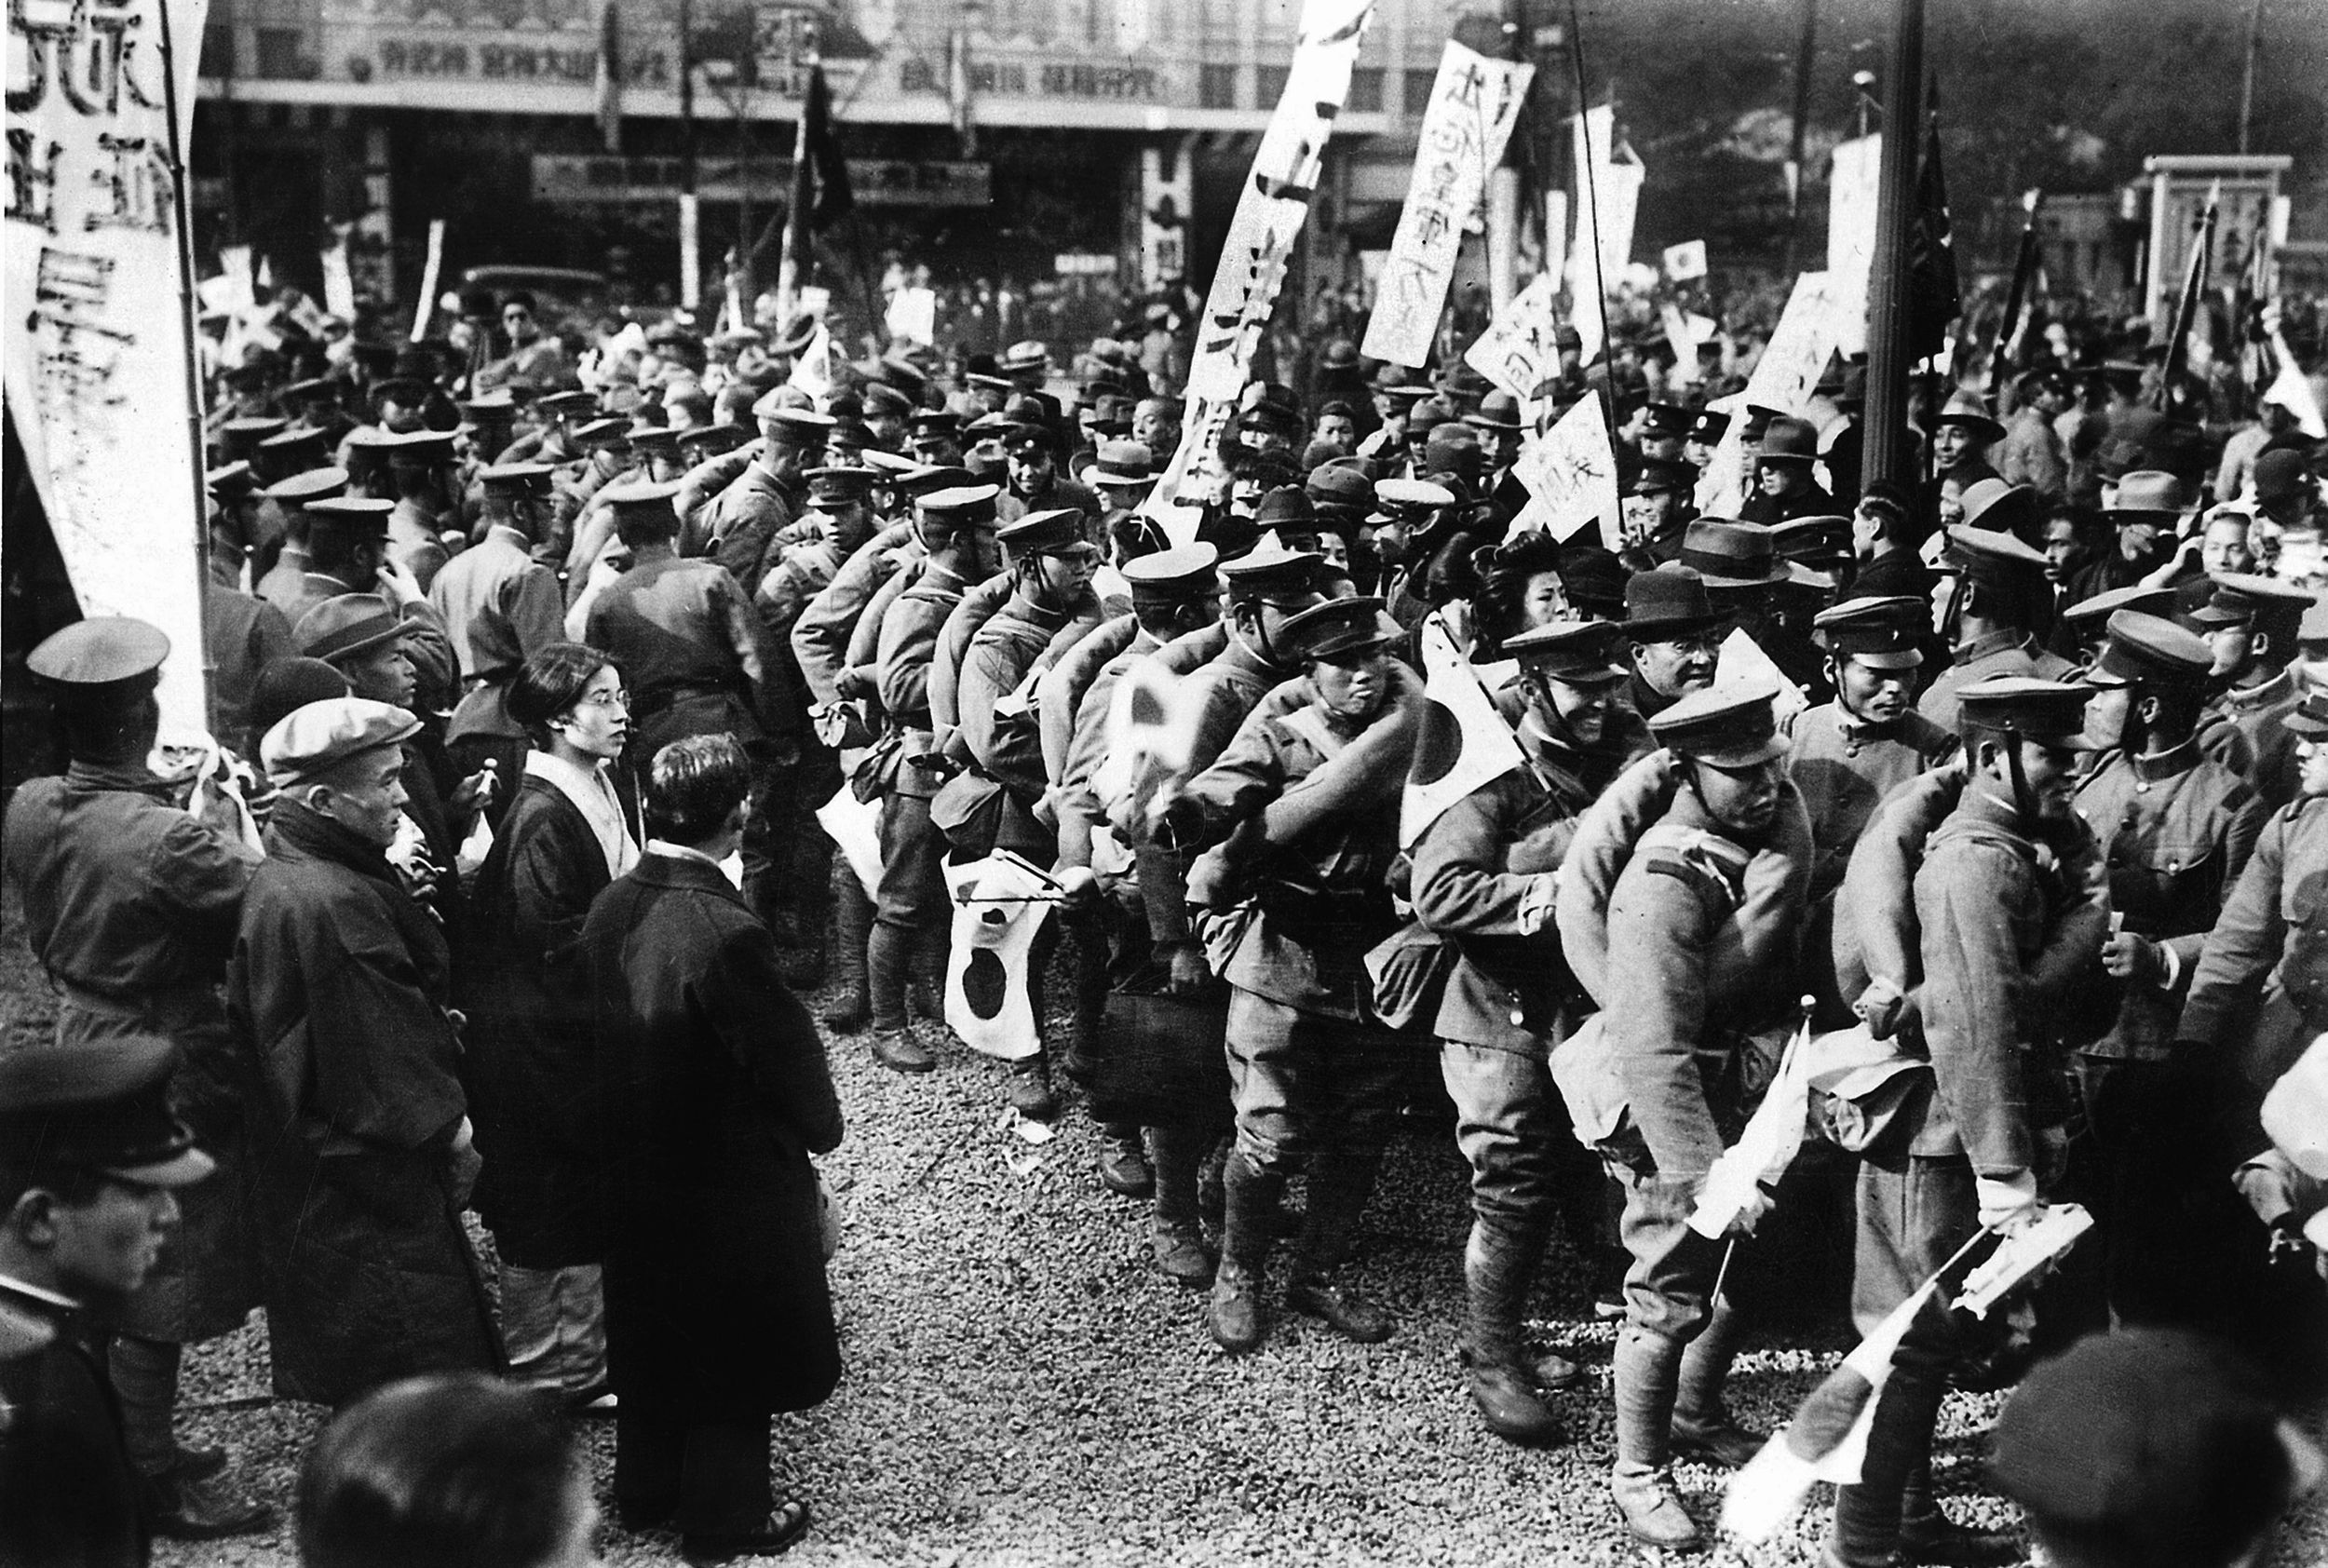 Japanese reinforcements depart for the Manchurian front following the Russian invasion, which came several months before expected.